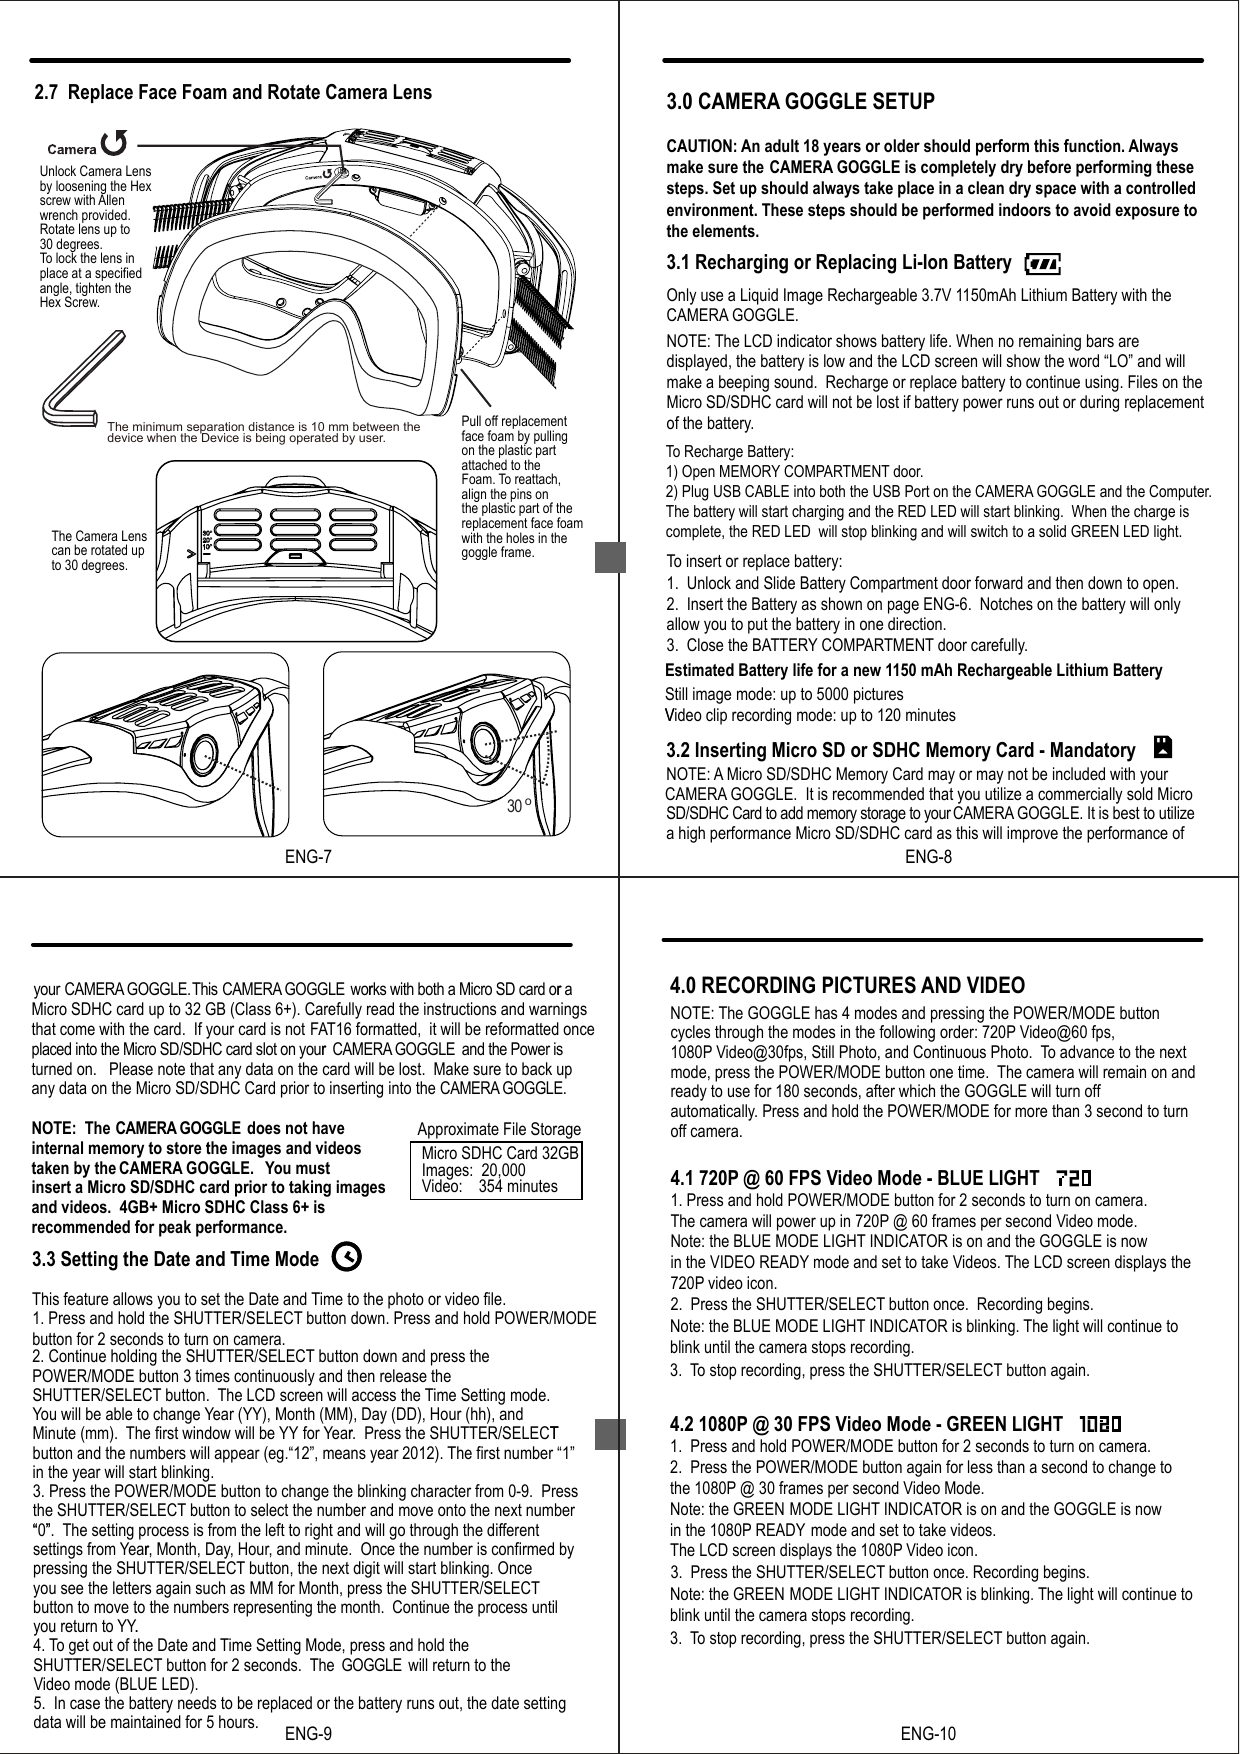 3.0 CAMERA GOGGLE SETUPCAUTION: An adult 18 years or older should perform this function. Alwaysmake sure the  CAMERA GOGGLE is completely dry before performing these steps. Set up should always take place in a clean dry space with a controlled environment. These steps should be performed indoors to avoid exposure to the elements.3.1 Recharging or Replacing Li-Ion BatteryNOTE:Only use a Liquid Image Rechargeable 3.7V 1150mAh Lithium Battery with theCAMERA GOGGLE. The LCD indicator shows battery life. When no remaining bars are displayed, the battery is low and the LCD screen will show the word “LO” and will make a beeping sound.  Recharge or replace battery to continue using. Files on theMicro SD/SDHC card will not be lost if battery power runs out or during replacementof the battery.To insert or replace battery:1.  Unlock and Slide Battery Compartment door forward and then down to open.2.  Insert the Battery as shown on page ENG-6.  Notches on the battery will onlyallow you to put the battery in one direction.3.  Close the BATTERY COMPARTMENT door carefully.3.2 Inserting Micro SD or SDHC Memory Card - MandatoryNOTE: A Micro SD/SDHC Memory Card may or may not be included with your CAMERA GOGGLE.  It is recommended that you utilize a commercially sold Micro SD/SDHC Card to add memory storage to your CAMERA GOGGLE. It is best to utilize a high performance Micro SD/SDHC card as this will improve the performance of Estimated Battery life for a new 1150 mAh Rechargeable Lithium BatteryStill image mode: up to 5000 picturesVideo clip recording mode: up to 120 minutesTo Recharge Battery:1) Open MEMORY COMPARTMENT door.2) Plug USB CABLE into both the USB Port on the CAMERA GOGGLE and the Computer.The battery will start charging and the RED LED will start blinking.  When the charge is complete, the RED LED  will stop blinking and will switch to a solid GREEN LED light.  VENG-8your CAMERA GOGGLE.This CAMERA GOGGLECAMERA GOGGLE works with both a Micro SD card or aMicro SDHC card up to 32 GB (Class 6+). Carefully read the instructions and warningsthat come with the card.  If your card is not FAT16 formatted,  it will be reformatted once placed into the Micro SD/SDHC card slot on your   and the Power is turned on.   Please note that any data on the card will be lost.  Make sure to back up any data on the Micro SD/SDHC Card prior to inserting into the CAMERA GOGGLE.NOTE:  The CAMERA GOGGLE  does not haveinternal memory to store the images and videos taken by the  . ou must insert a Micro SD/SDHC card prior to taking images and videos.  4GB+ Micro SDHC Class 6+ is recommended for peak performance. 3.3 Setting the Date and Time ModeThis feature allows you to set the Date and Time to the photo or video file.1. Press and hold the SHUTTER/SELECT button down. Press and hold POWER/MODE button for 2 seconds to turn on camera.2. Continue holding the SHUTTER/SELECT button down and press the POWER/MODE button 3 times continuously and then release the SHUTTER/SELECT button.  The LCD screen will access the Time Setting mode.You will be able to change Year (YY), Month (MM), Day (DD), Hour (hh), and Minute (mm).  The first window will be YY for Year.  Press the SHUTTER/SELECTbutton and the numbers will appear (eg.“12”, means year 2012). The first number “1” in the year will start blinking. 3. Press the POWER/MODE button to change the blinking character from 0-9.  Press the SHUTTER/SELECT button to select the number and move onto the next number “0”. The setting process is from the left to right and will go through the differentsettings from Year, Month, Day, Hour, and minute.  Once the number is confirmed by pressing the SHUTTER/SELECT button, the next digit will start blinking. Once you see the letters again such as MM for Month, press the SHUTTER/SELECTbutton to move to the numbers representing the month.  Continue the process until you return to YY.4. To get out of the Date and Time Setting Mode, press and hold the SHUTTER/SELECT button for 2 seconds.  The GOGGLE  will return to the Video mode (BLUE LED).5.  In case the battery needs to be replaced or the battery runs out, the date setting data will be maintained for 5 hours.     r r r   CAMERA GOGGLE. Yr T  “ ”r.ENG-9Approximate File Storage Micro SDHC Card 32GBImages:  20,000Video:    354 minutesENG-10Note: the BLUE MODE LIGHT INDICATOR is blinking. The light will continue to blink until the camera stops recording.3. To stop recording, press the SHUTTER/SELECT button again. Note: the GREEN MODE LIGHT INDICATOR is blinking. The light will continue to blink until the camera stops recording.3. To stop recording, press the SHUTTER/SELECT button again.         cycles through the modes in the following order: 720P Video@60 fps, 1080P Video@30fps, Still Photo, and Continuous Photo.  To advance to the next  mode, press the POWER/MODE button one time.  The camera will remain on andready to use for 180 seconds, after which the GOGGLE will turn off automatically. Press and hold the POWER/MODE for more than 3 second to turn off camera.4.1 720P @ 60 FPS Video Mode - BLUE LIGHT1. Press and hold POWER/MODE button for 2 seconds to turn on camera. The camera will power up in 720P @ 60 frames per second Video mode. Note: the BLUE MODE LIGHT INDICATOR is on and the GOGGLE is now in the VIDEO READY mode and set to take Videos. The LCD screen displays the  720P video icon.2.  Press the SHUTTER/SELECT button once.  Recording begins.4.2 1080P @ 30 FPS Video Mode - GREEN LIGHT1.  Press and hold POWER/MODE button for 2 seconds to turn on camera.2.  Press the POWER/MODE button again for less than a second to change to the 1080P @ 30 frames per second Video Mode. Note: the GREEN  MODE LIGHT INDICATOR is on and the GOGGLE is nowin the 1080P READY mode and set to take videos.   The LCD screen displays the 1080P Video icon.4.0 RECORDING PICTURES AND VIDEONOTE: The GOGGLE has 4 modes and pressing the POWER/MODE button3.  Press the SHUTTER/SELECT button once. Recording begins.2.7  Replace Face Foam and Rotate Camera LensENG-7Unlock Camera Lensby loosening the Hex screw with Allen wrench provided.Rotate lens up to30 degrees.  To lock the lens in place at a specified angle, tighten the Hex Screw.Pull off replacementface foam by pullingon the plastic partattached to the Foam. To reattach,align the pins on the plastic part of thereplacement face foamwith the holes in thegoggle frame.The Camera Lenscan be rotated up to 30 degrees.30 oThe minimum separation distance is 10 mm between the device when the Device is being operated by user.